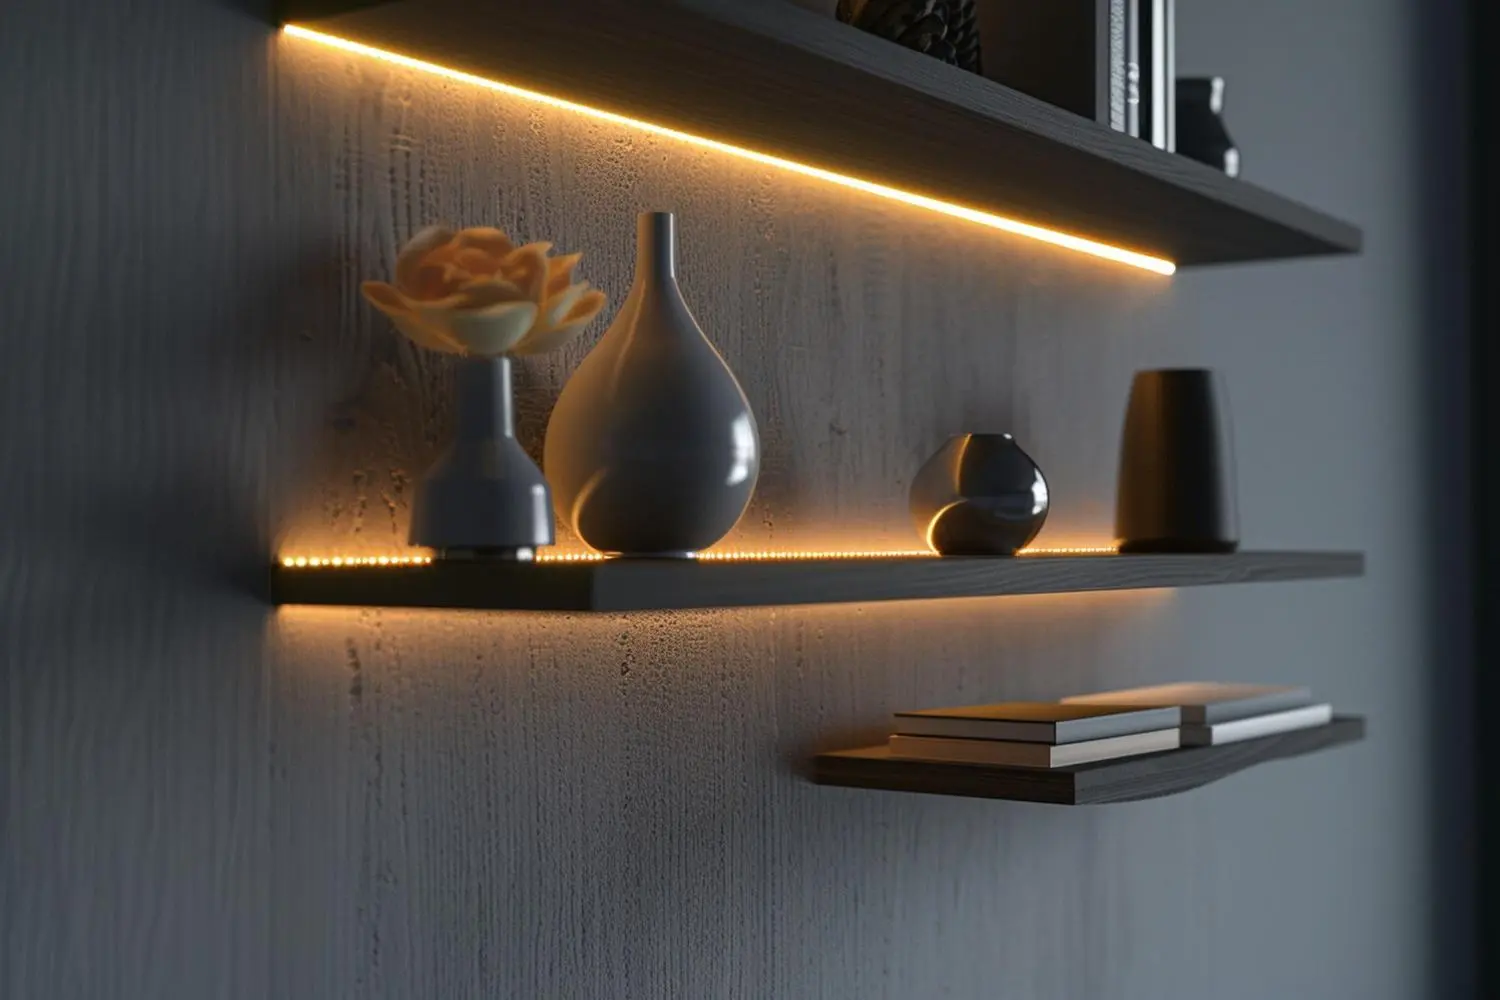 Built In Shelf Lighting guide featuring room shelf with lights